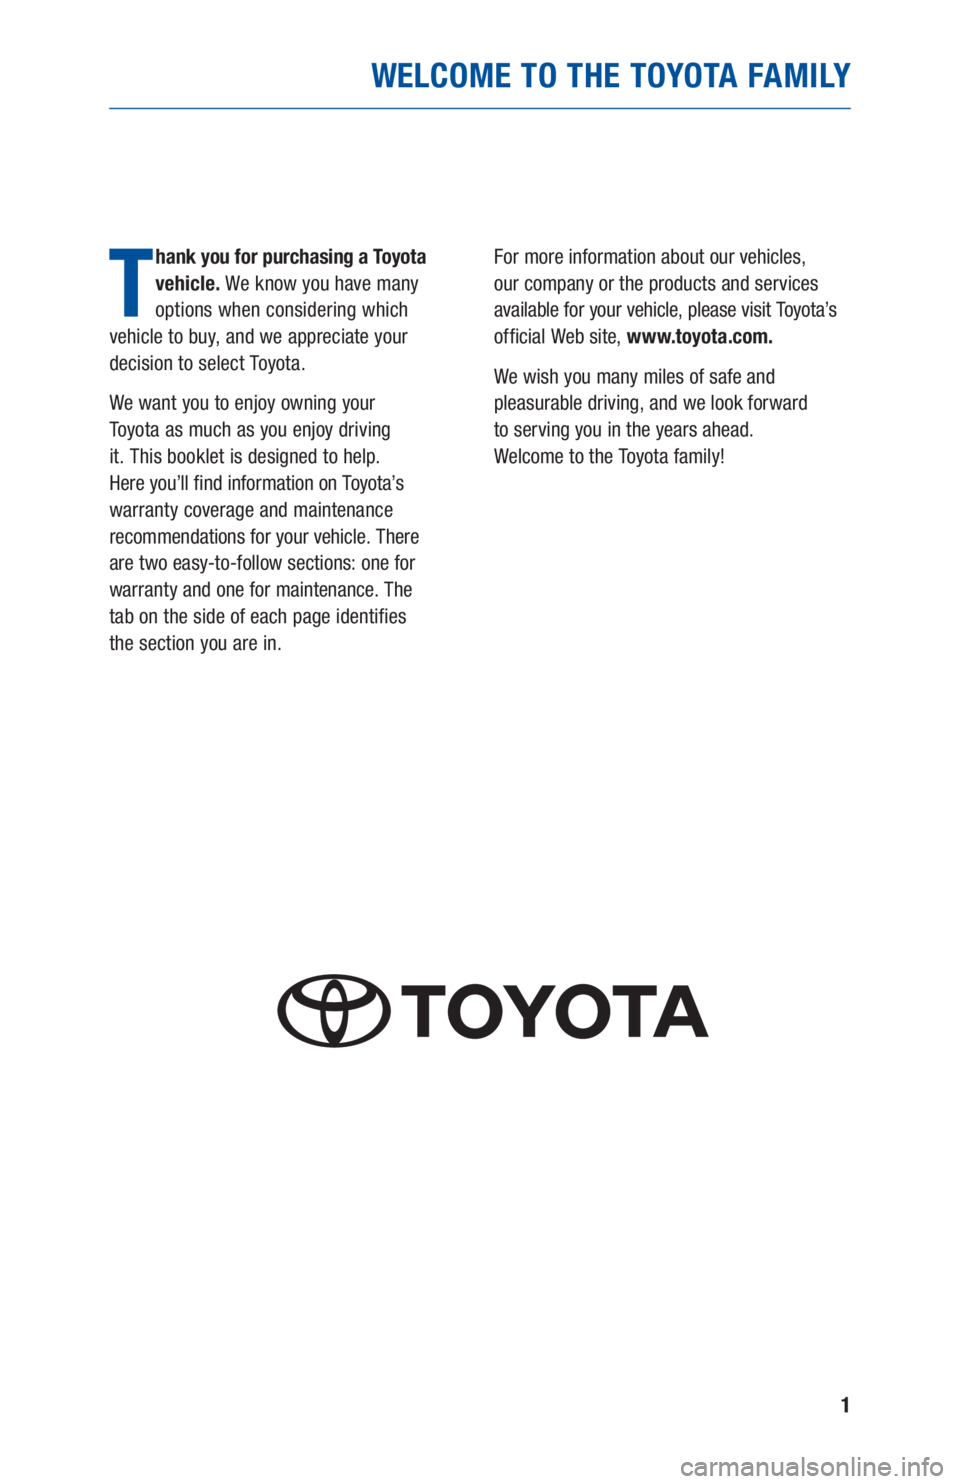 TOYOTA TACOMA 2019  Warranties & Maintenance Guides (in English) 1
WELCOME TO THE TOYOTA FAMILY
T
hank you for purchasing a Toyota 
vehicle. We know you have many 
options when considering which  
vehicle to buy, and we appreciate your 
decision to select Toyota.
W